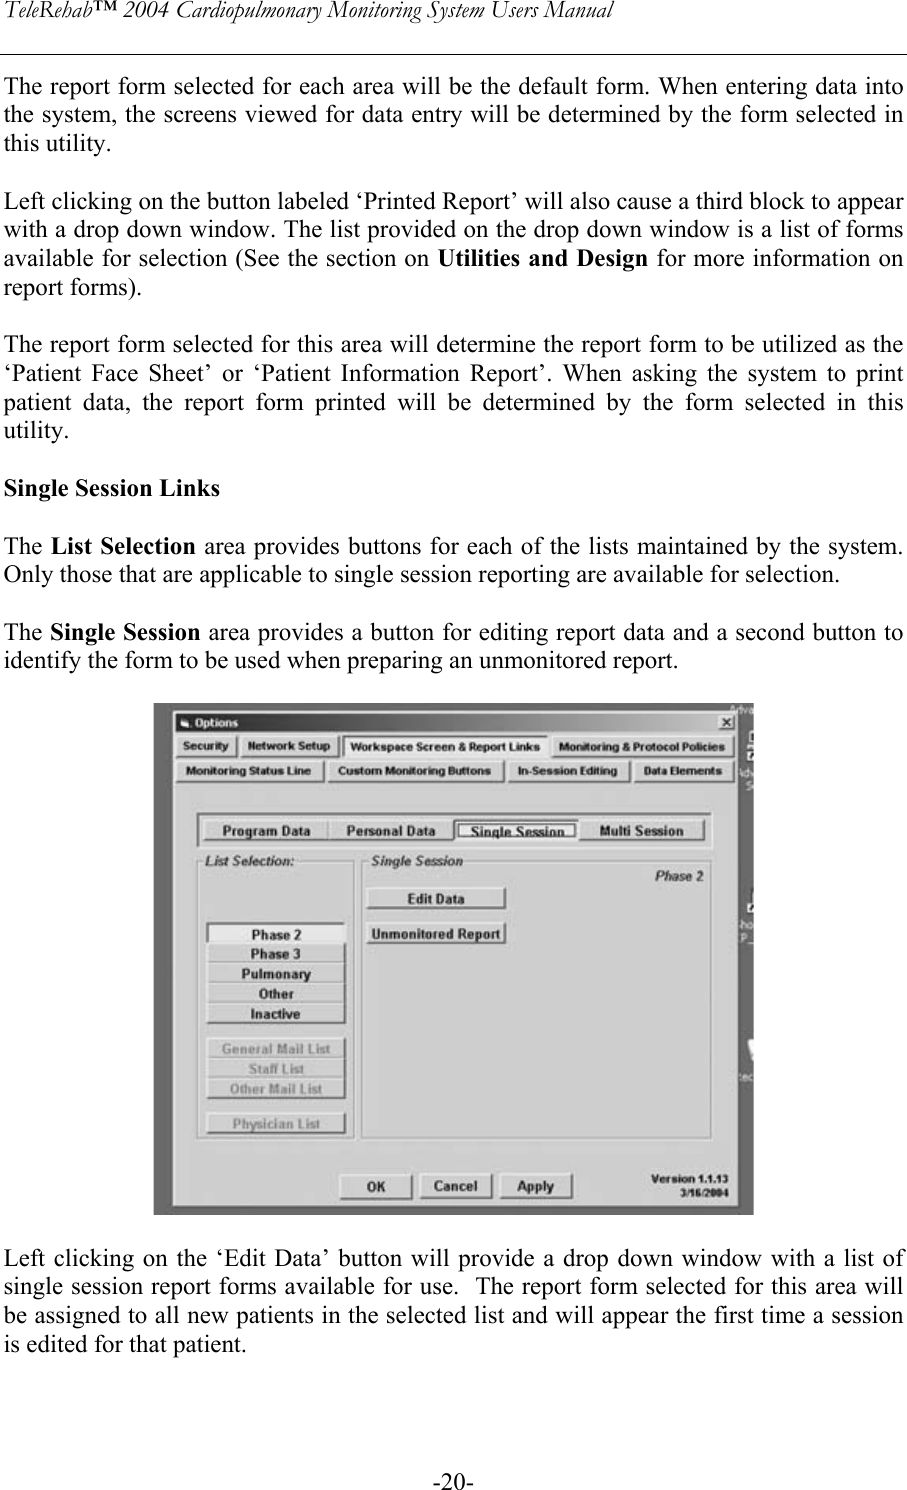 TeleRehab™ 2004 Cardiopulmonary Monitoring System Users Manual    -20-The report form selected for each area will be the default form. When entering data into the system, the screens viewed for data entry will be determined by the form selected in this utility.  Left clicking on the button labeled ‘Printed Report’ will also cause a third block to appear with a drop down window. The list provided on the drop down window is a list of forms available for selection (See the section on Utilities and Design for more information on report forms).  The report form selected for this area will determine the report form to be utilized as the ‘Patient Face Sheet’ or ‘Patient Information Report’. When asking the system to print patient data, the report form printed will be determined by the form selected in this utility.  Single Session Links  The List Selection area provides buttons for each of the lists maintained by the system. Only those that are applicable to single session reporting are available for selection.  The Single Session area provides a button for editing report data and a second button to identify the form to be used when preparing an unmonitored report.     Left clicking on the ‘Edit Data’ button will provide a drop down window with a list of single session report forms available for use.  The report form selected for this area will be assigned to all new patients in the selected list and will appear the first time a session is edited for that patient.   